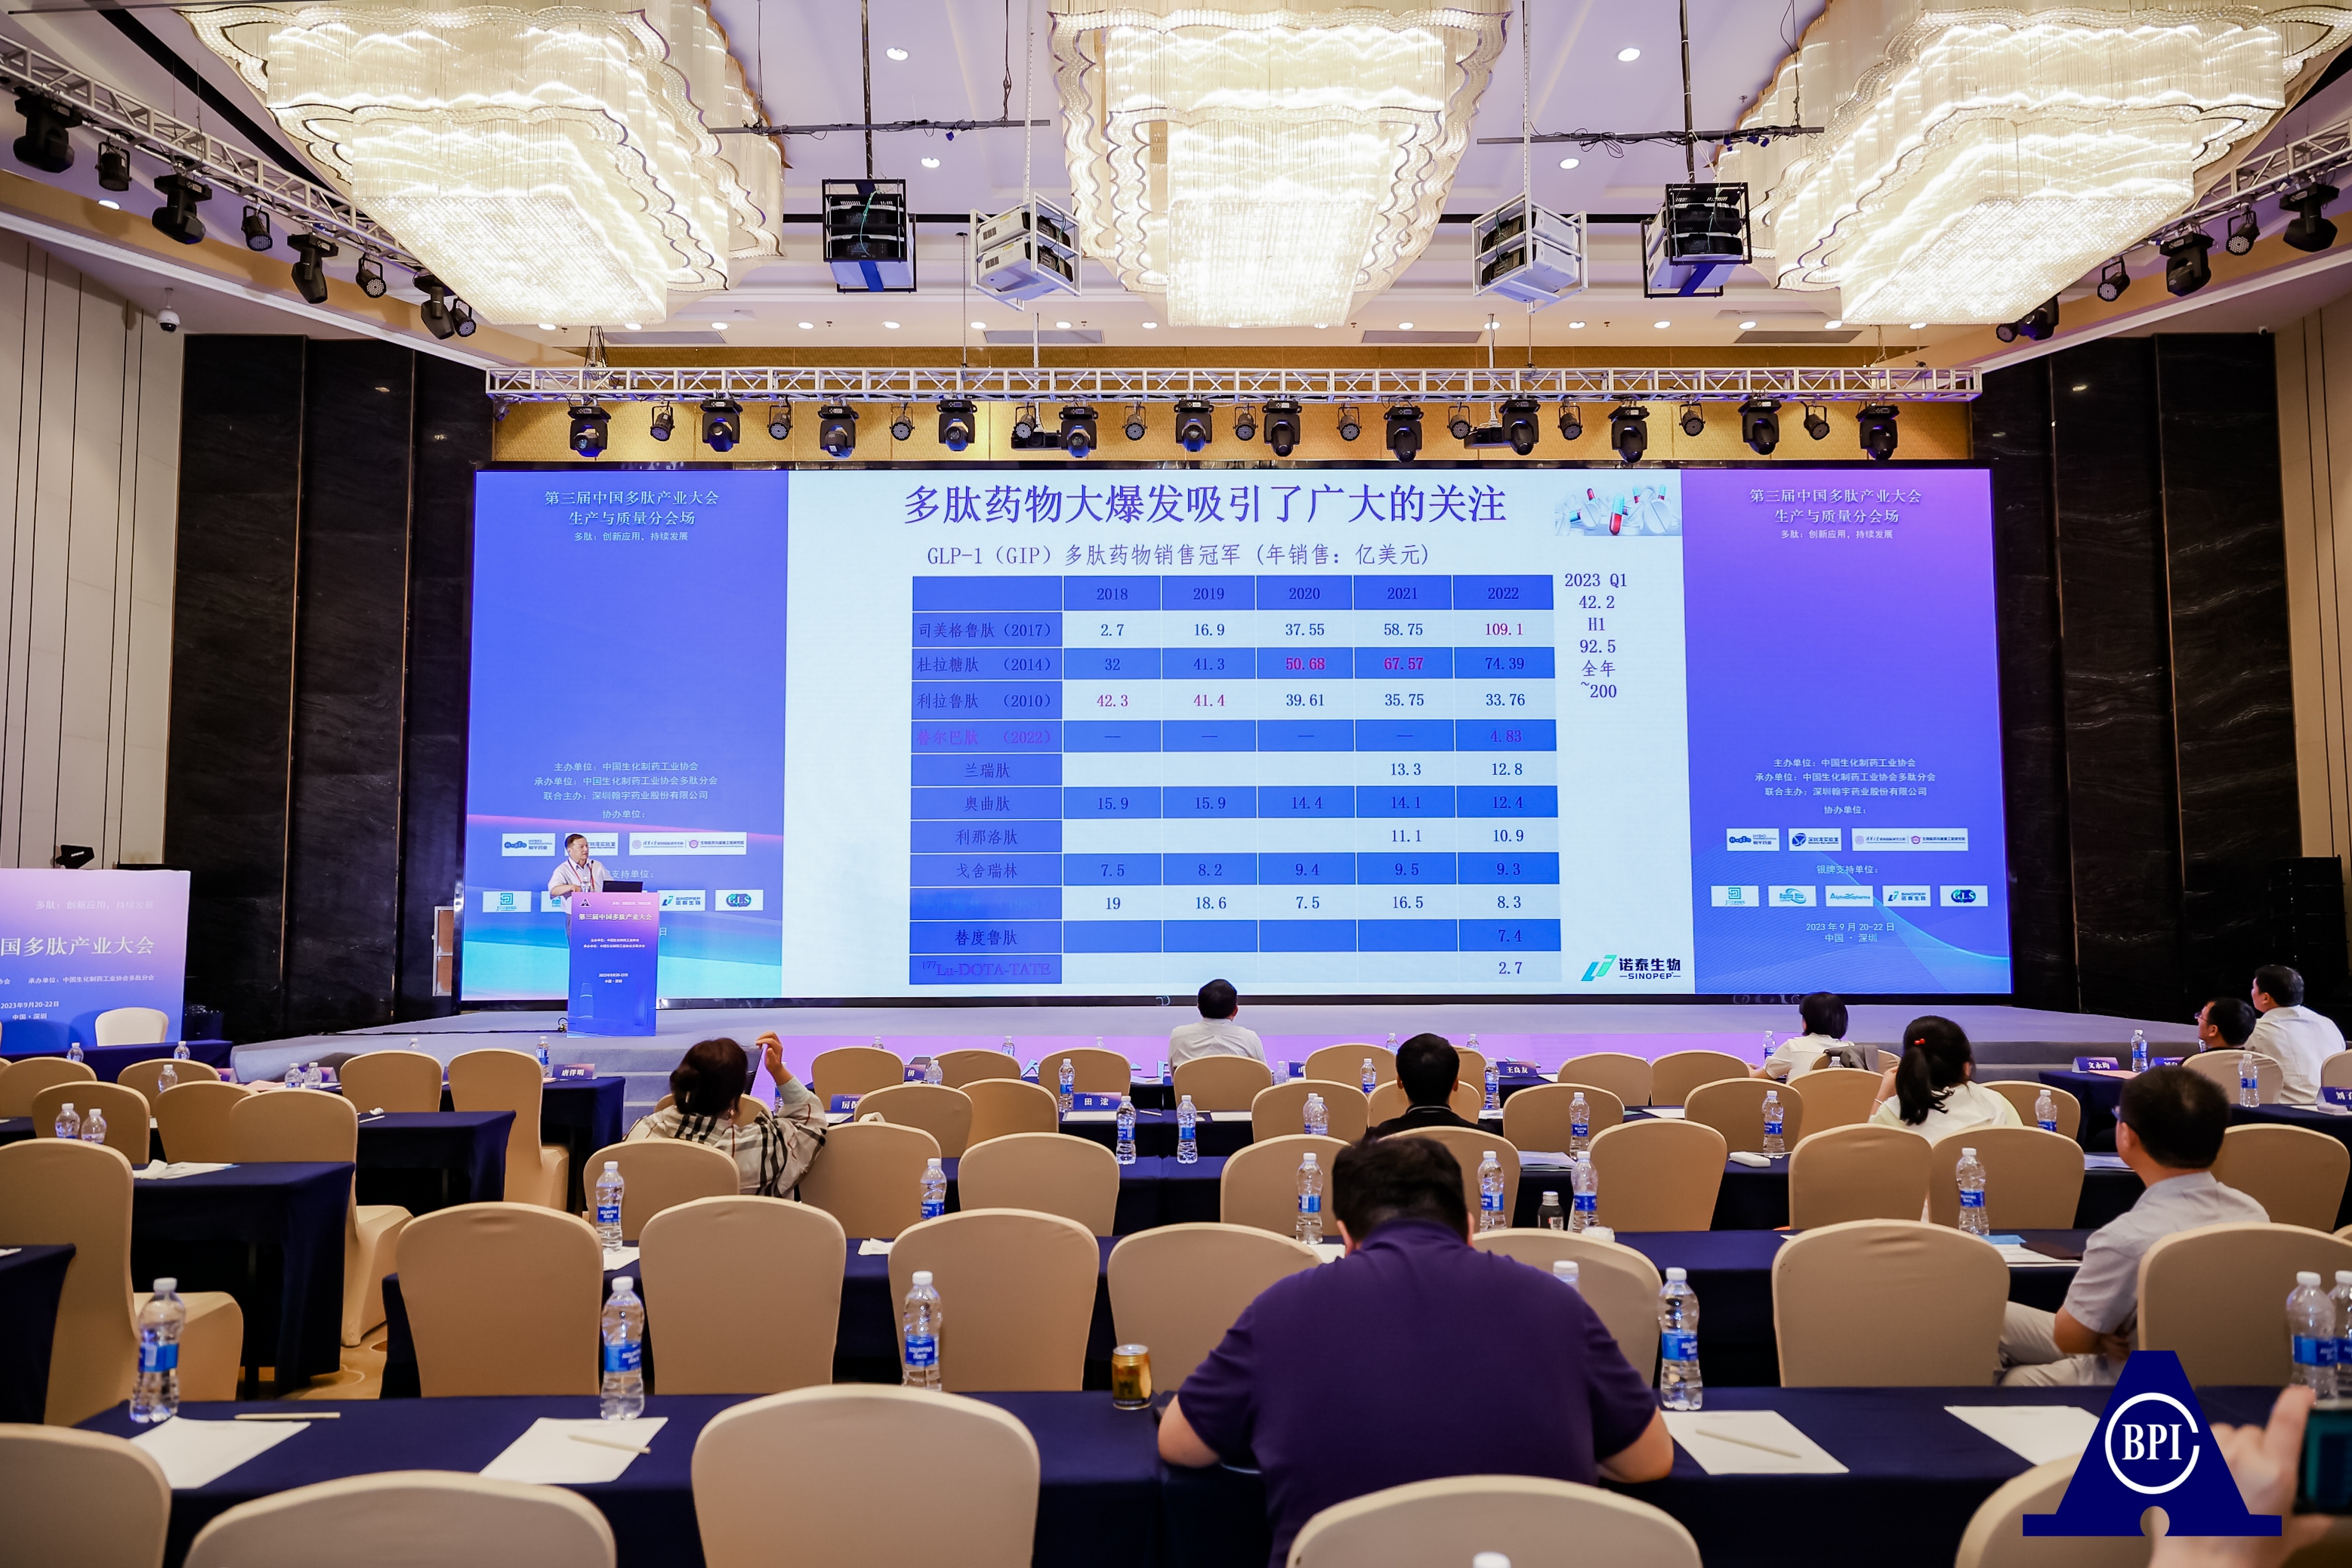 The 3rd China Peptide Industry Conference was successfully concluded!